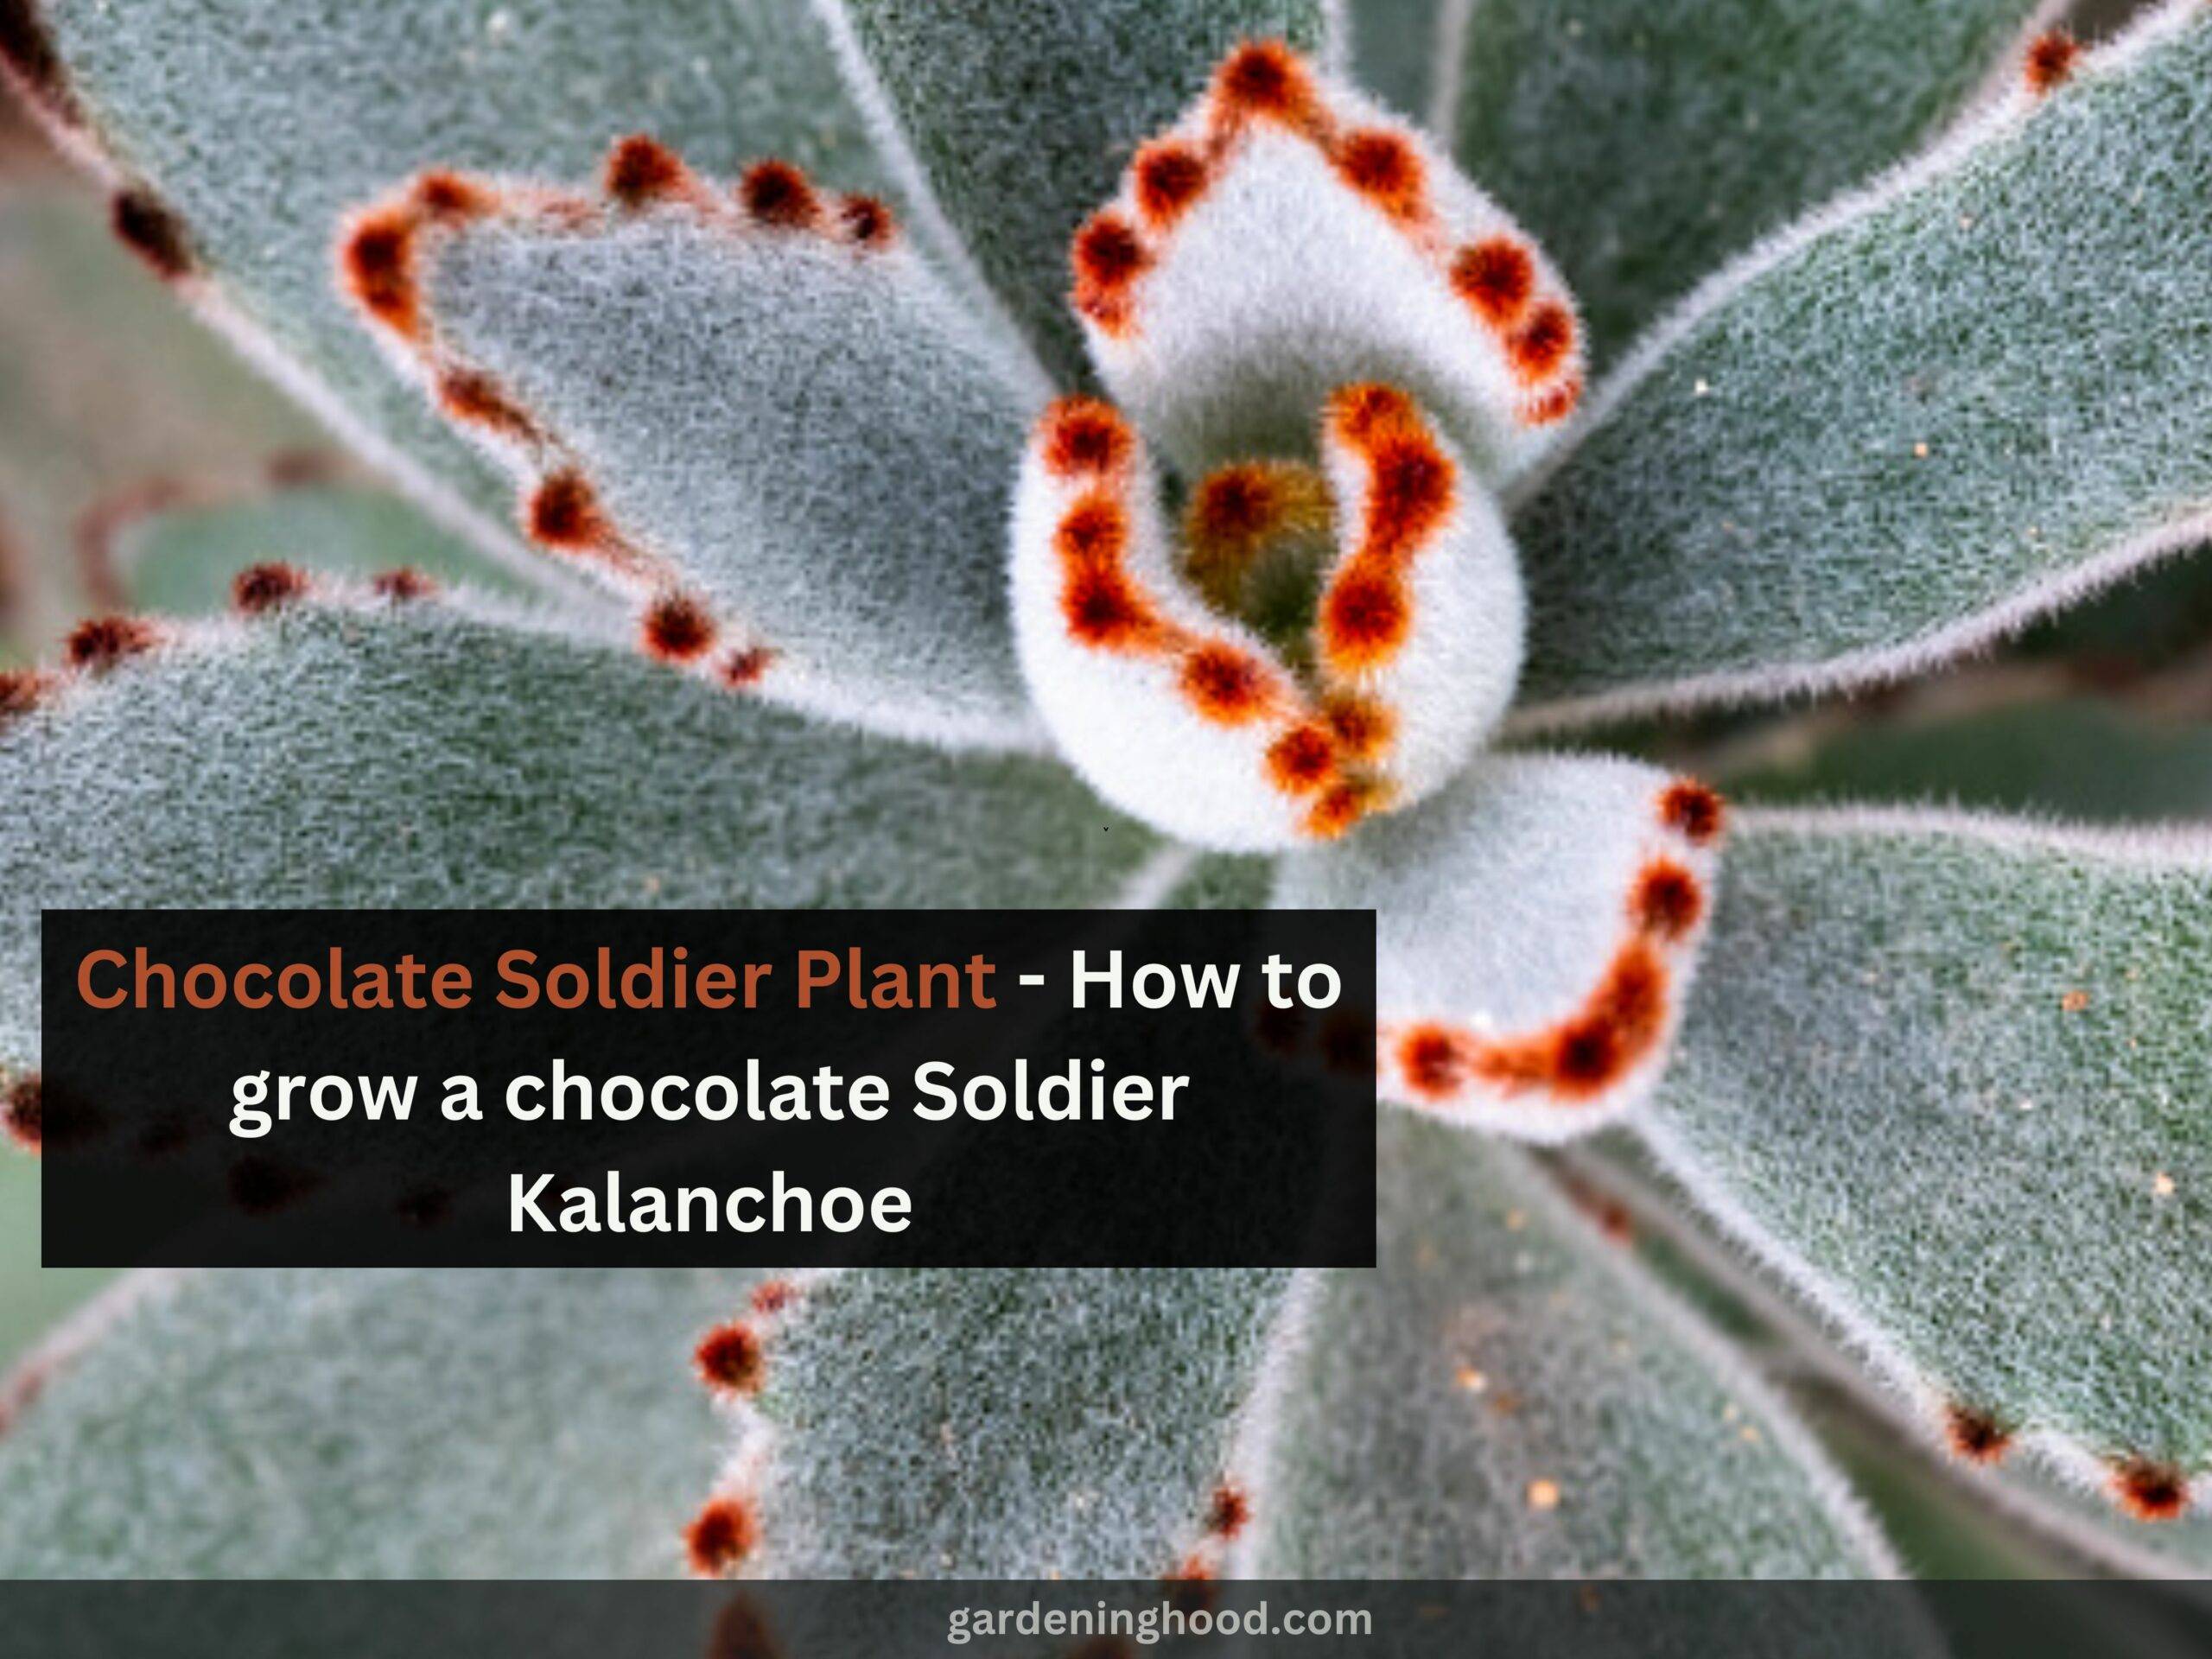 Chocolate Soldier Plant - How to grow a chocolate Soldier Kalanchoe